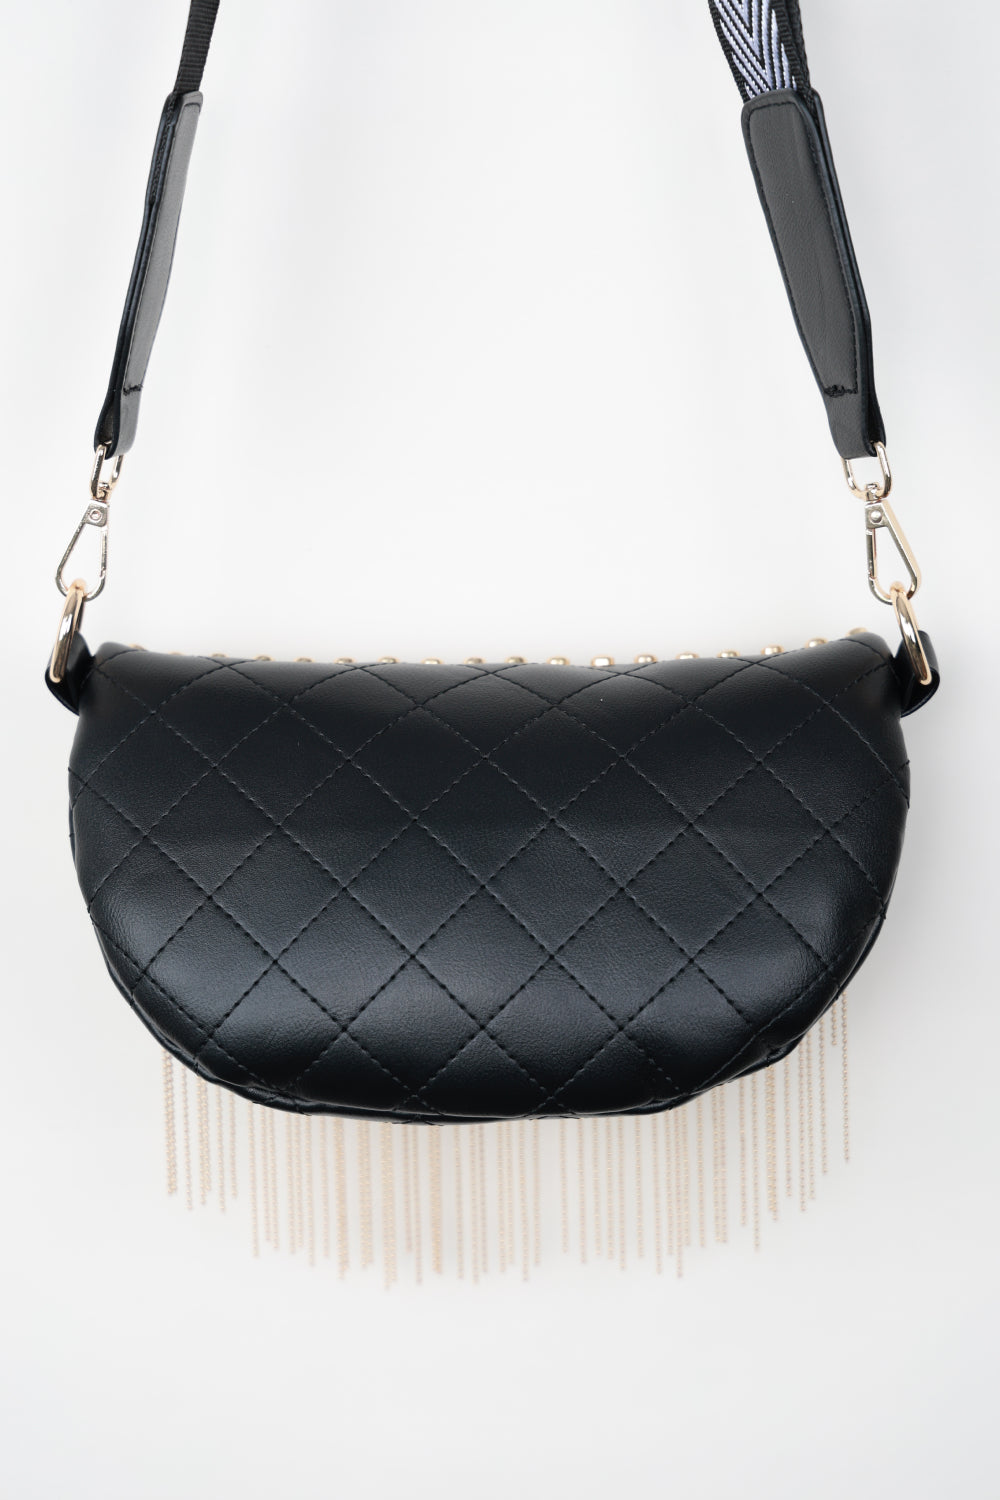 PU Leather Studded Sling Bag with Fringes The Stout Steer